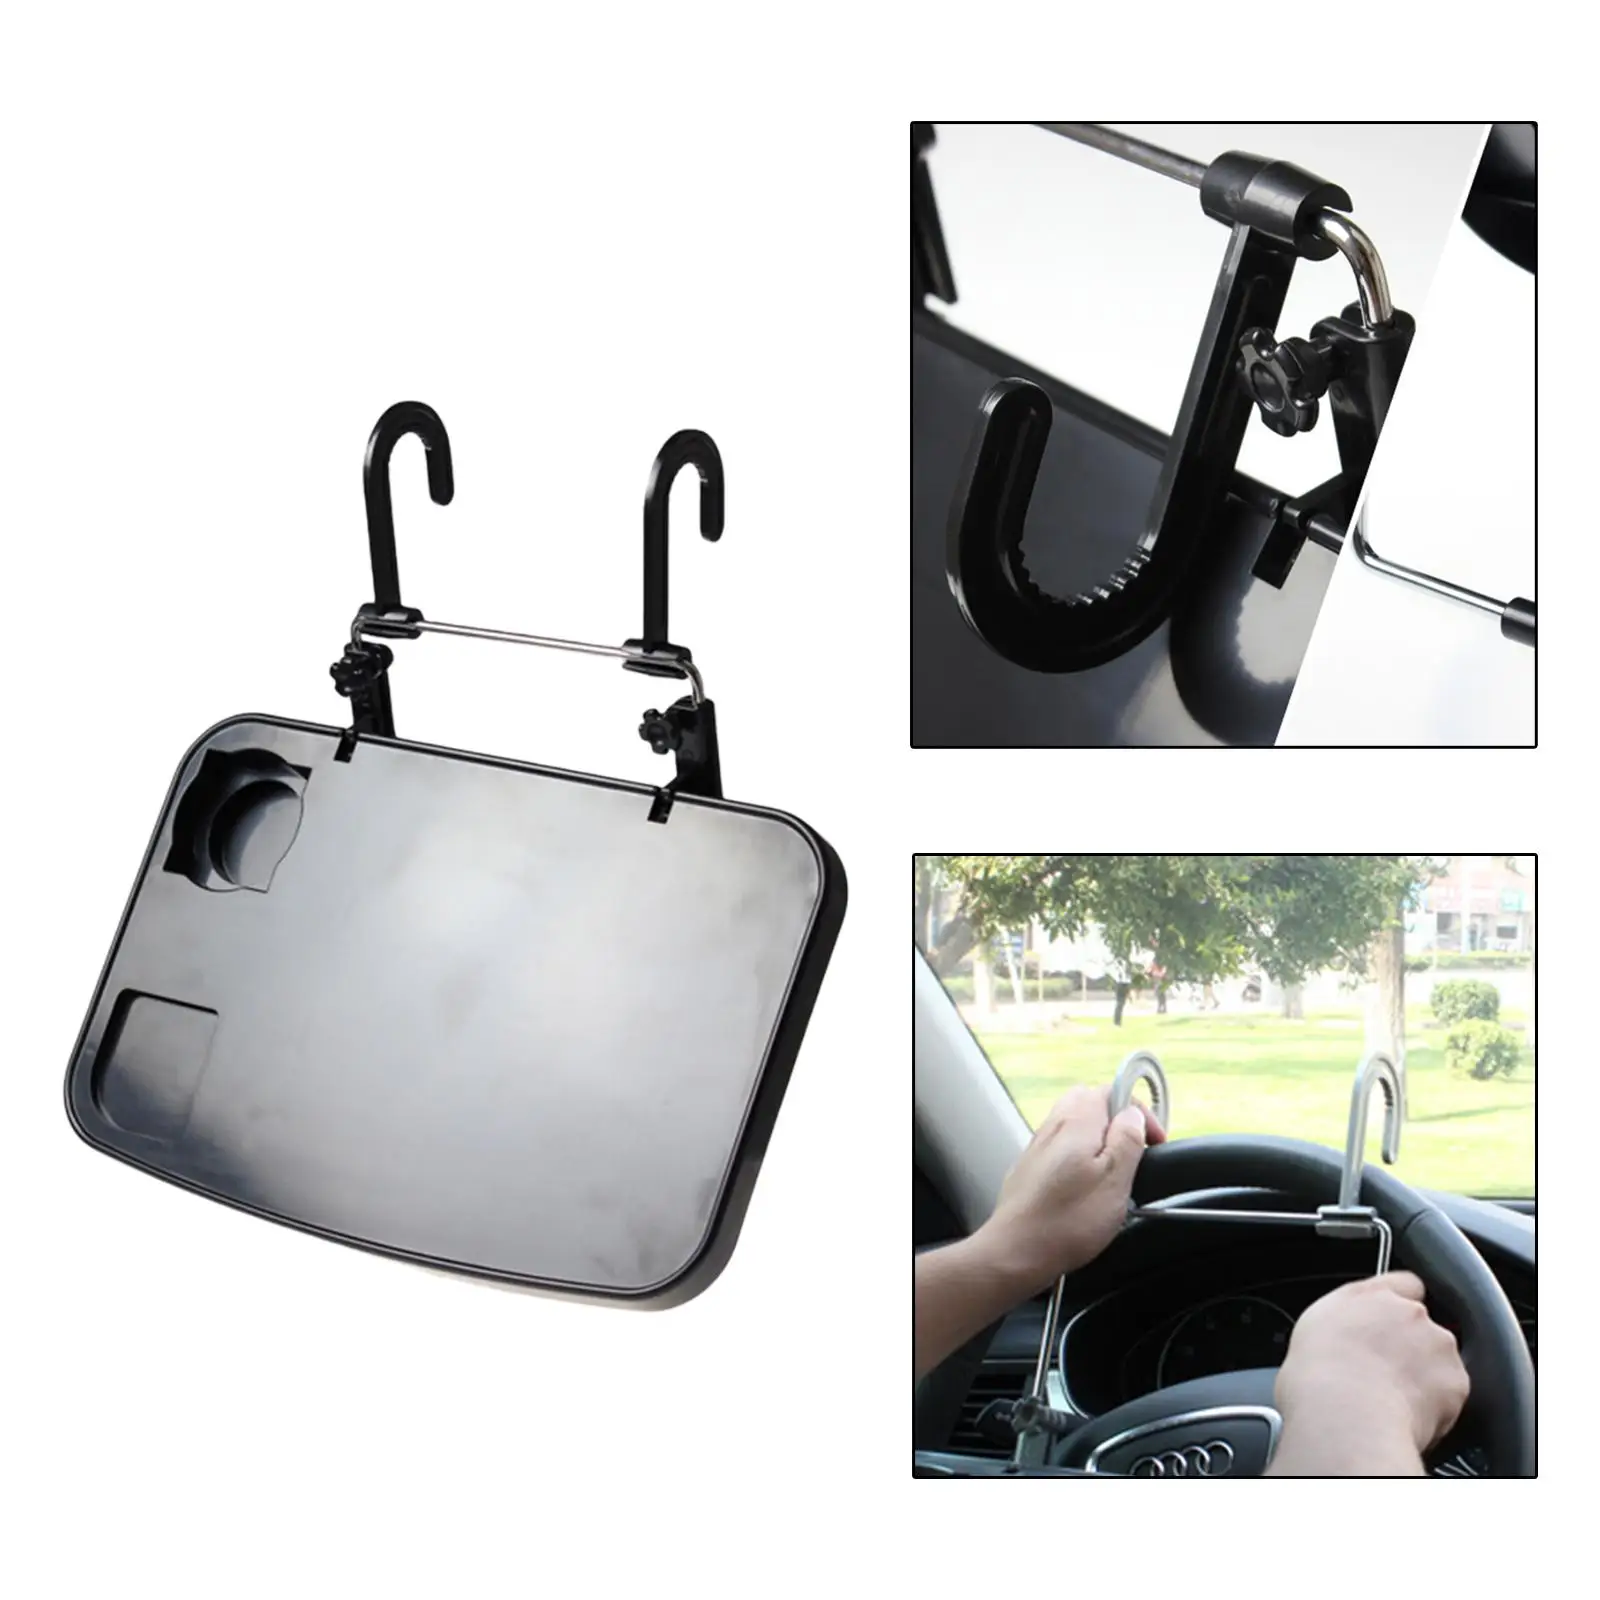 Car Computer Rack Foldable Food Drink Hanging Car Steering Wheel Tray Table Shelf Laptop Stand Fit for Kids PC Car Travel